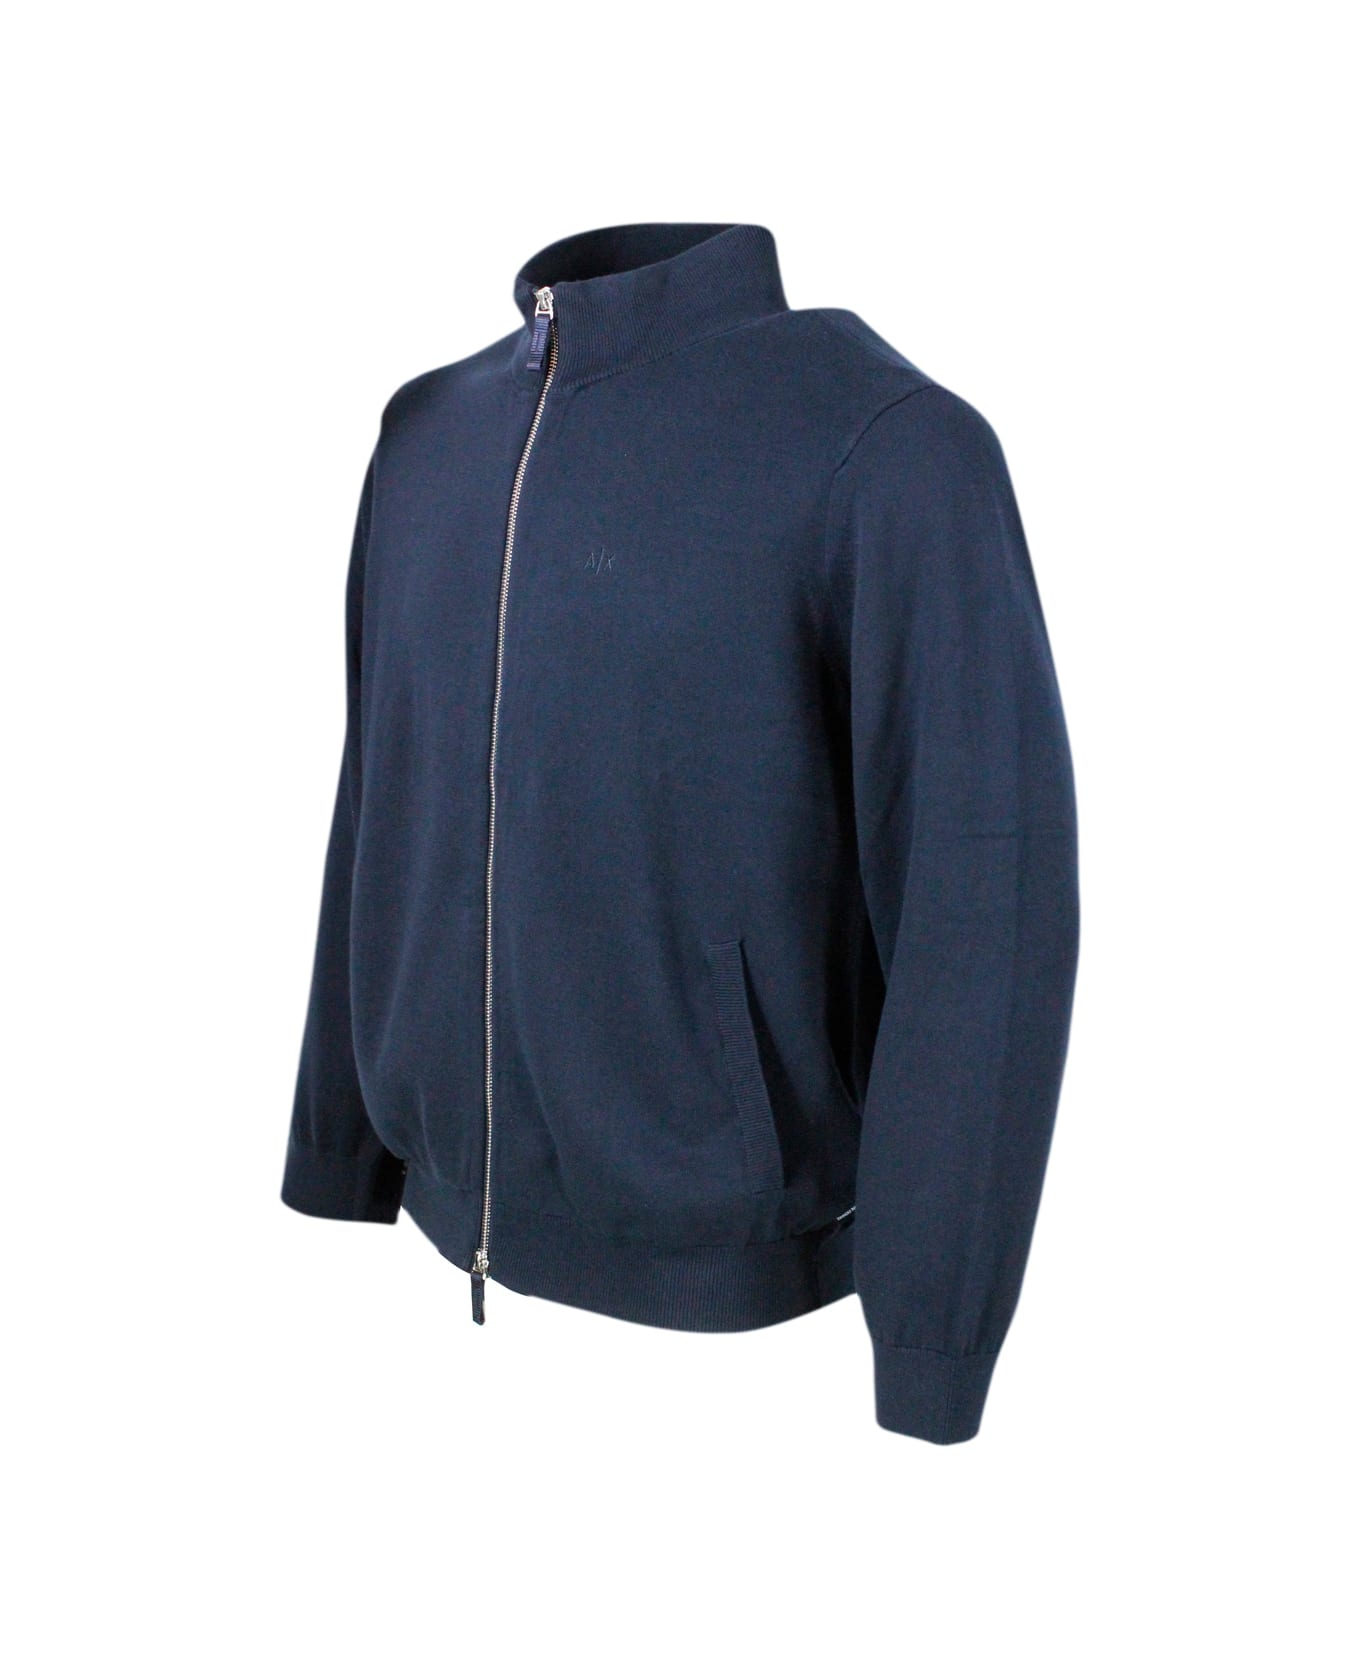 Armani Collezioni Lightweight Full Zip Long-sleeved Shirt Made Of 100% Cotton With Side Pockets - Blu